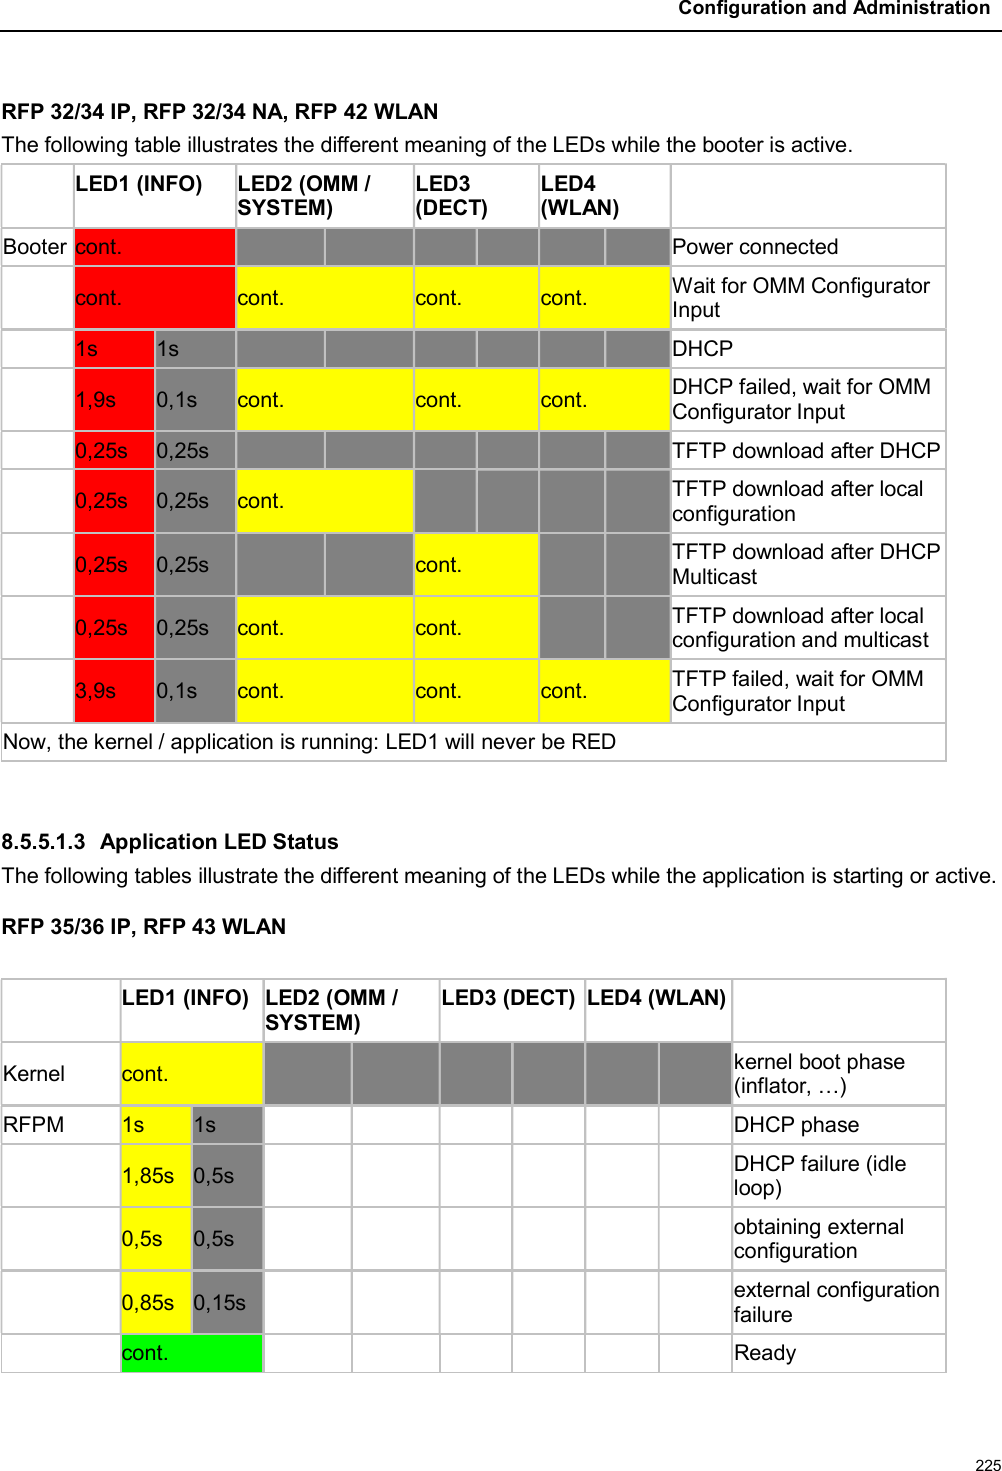 Configuration and Administration225RFP 32/34 IP, RFP 32/34 NA, RFP 42 WLANThe following table illustrates the different meaning of the LEDs while the booter is active. LED1 (INFO) LED2 (OMM / SYSTEM)LED3 (DECT)LED4 (WLAN)Booter cont. Power connectedcont. cont. cont. cont. Wait for OMM Configurator Input1s 1s DHCP 1,9s 0,1s cont. cont. cont. DHCP failed, wait for OMM Configurator Input0,25s 0,25s TFTP download after DHCP0,25s 0,25s cont. TFTP download after local configuration0,25s 0,25s cont.TFTP download after DHCP Multicast0,25s 0,25s cont. cont. TFTP download after local configuration and multicast3,9s 0,1s cont. cont. cont. TFTP failed, wait for OMM Configurator InputNow, the kernel / application is running: LED1 will never be RED8.5.5.1.3 Application LED StatusThe following tables illustrate the different meaning of the LEDs while the application is starting or active. RFP 35/36 IP, RFP 43 WLANLED1 (INFO) LED2 (OMM / SYSTEM)LED3 (DECT) LED4 (WLAN)Kernel  cont. kernel boot phase (inflator, …) RFPM  1s 1s DHCP phase 1,85s 0,5s DHCP failure (idle loop) 0,5s 0,5s obtaining external configuration 0,85s 0,15sexternal configuration failure cont. Ready 